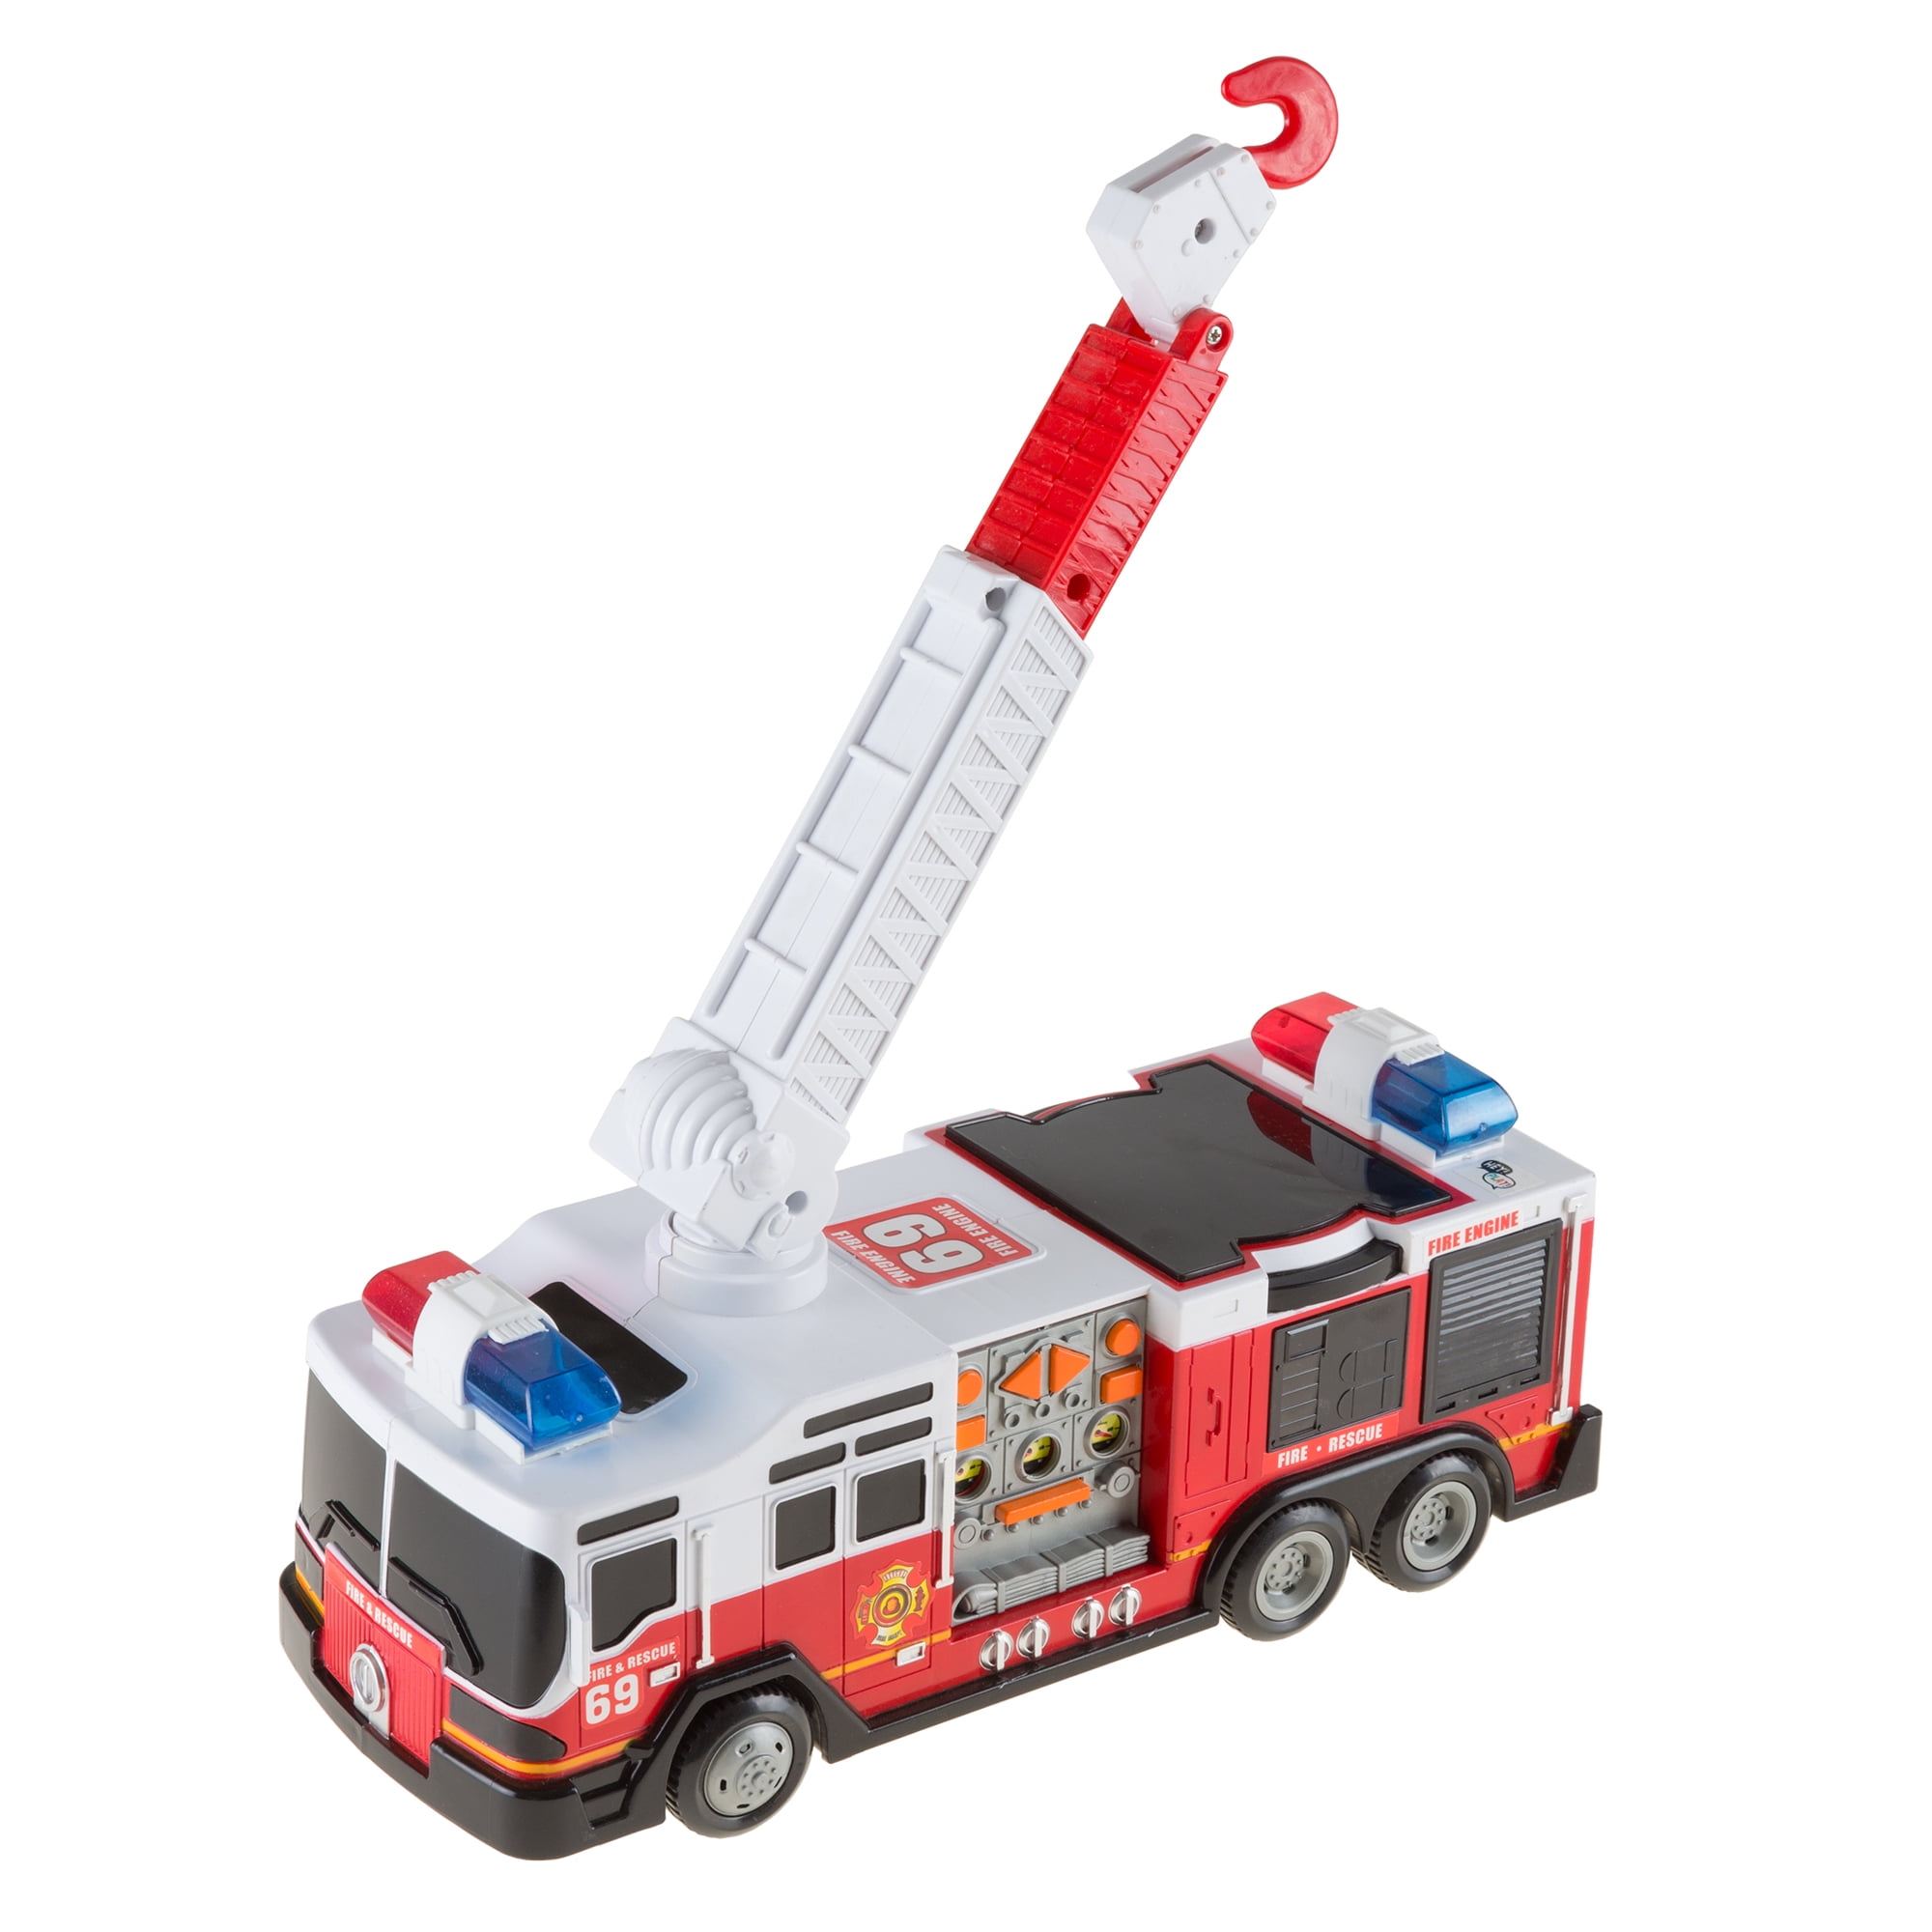 Fire Engine Rescue Toy Truck Fire Truck Extending Ladder That Can Turn 360 Degrees Great Birthday Gift for Boys /& Girls Lights /& Siren Sounds Bump /& Go Action Battery Operated Electric Vehicle